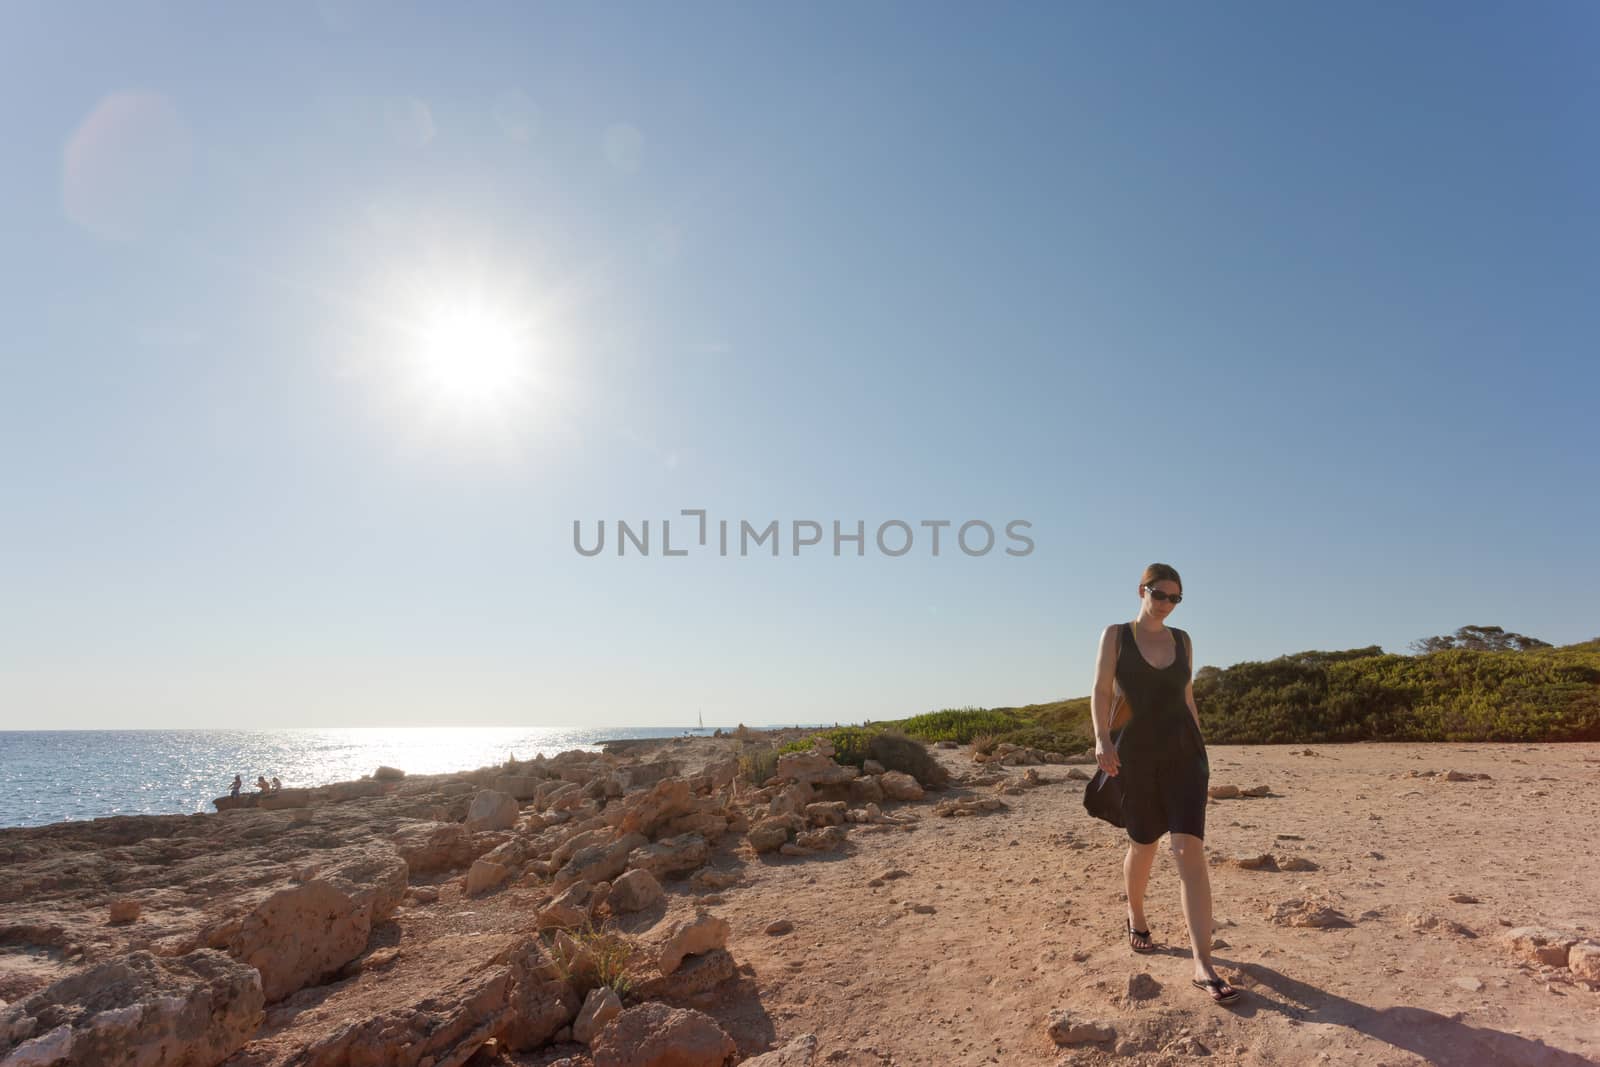 Cap de Ses Salines, Mallorca, Spain - A young woman going out for a walk at the beach of Ses Salines